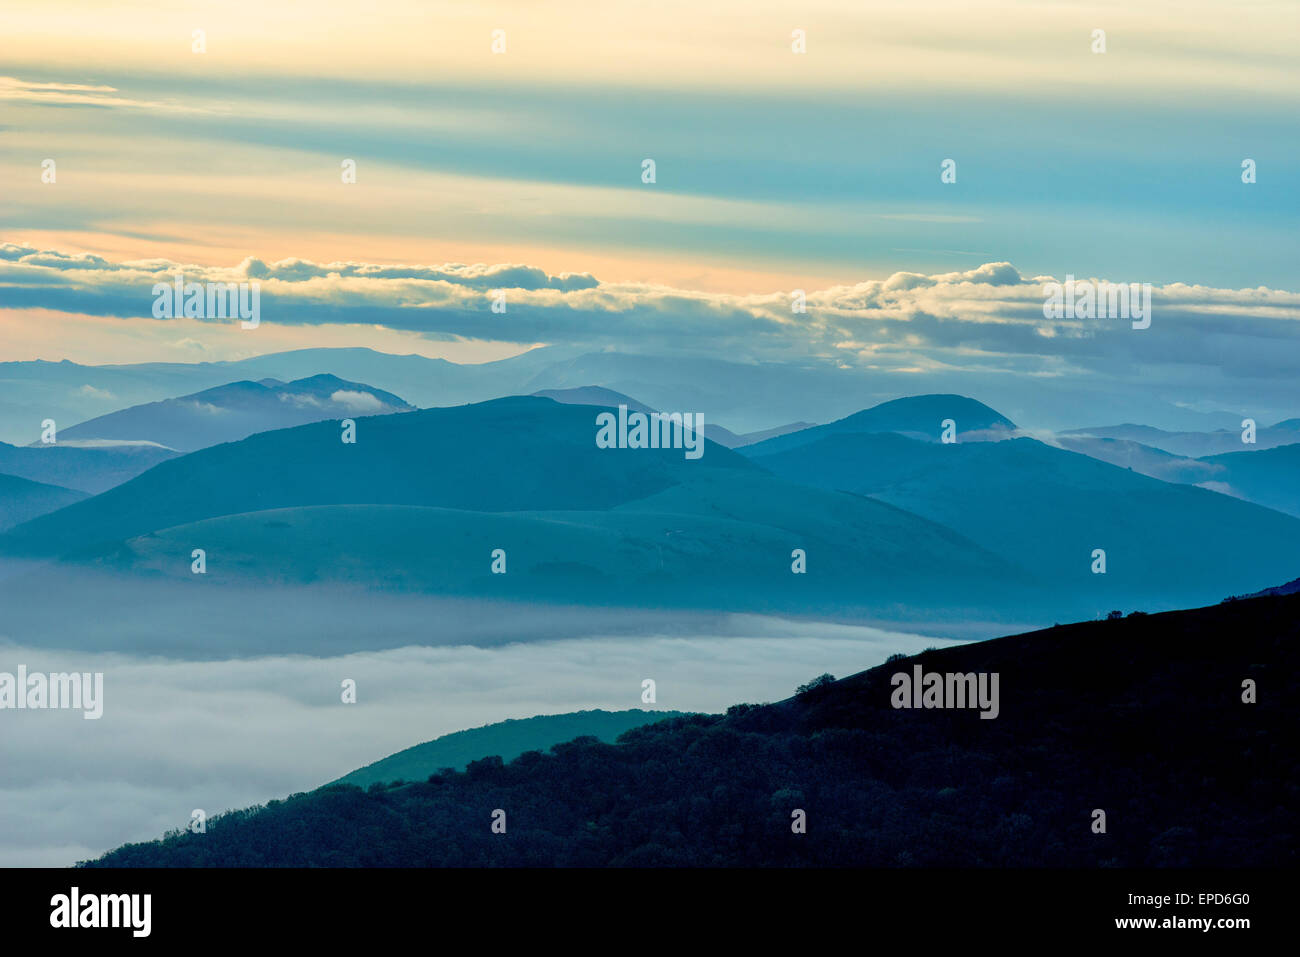 Silhouette of mountains at sunrise, Apennines, Umbria, Italy Stock Photo